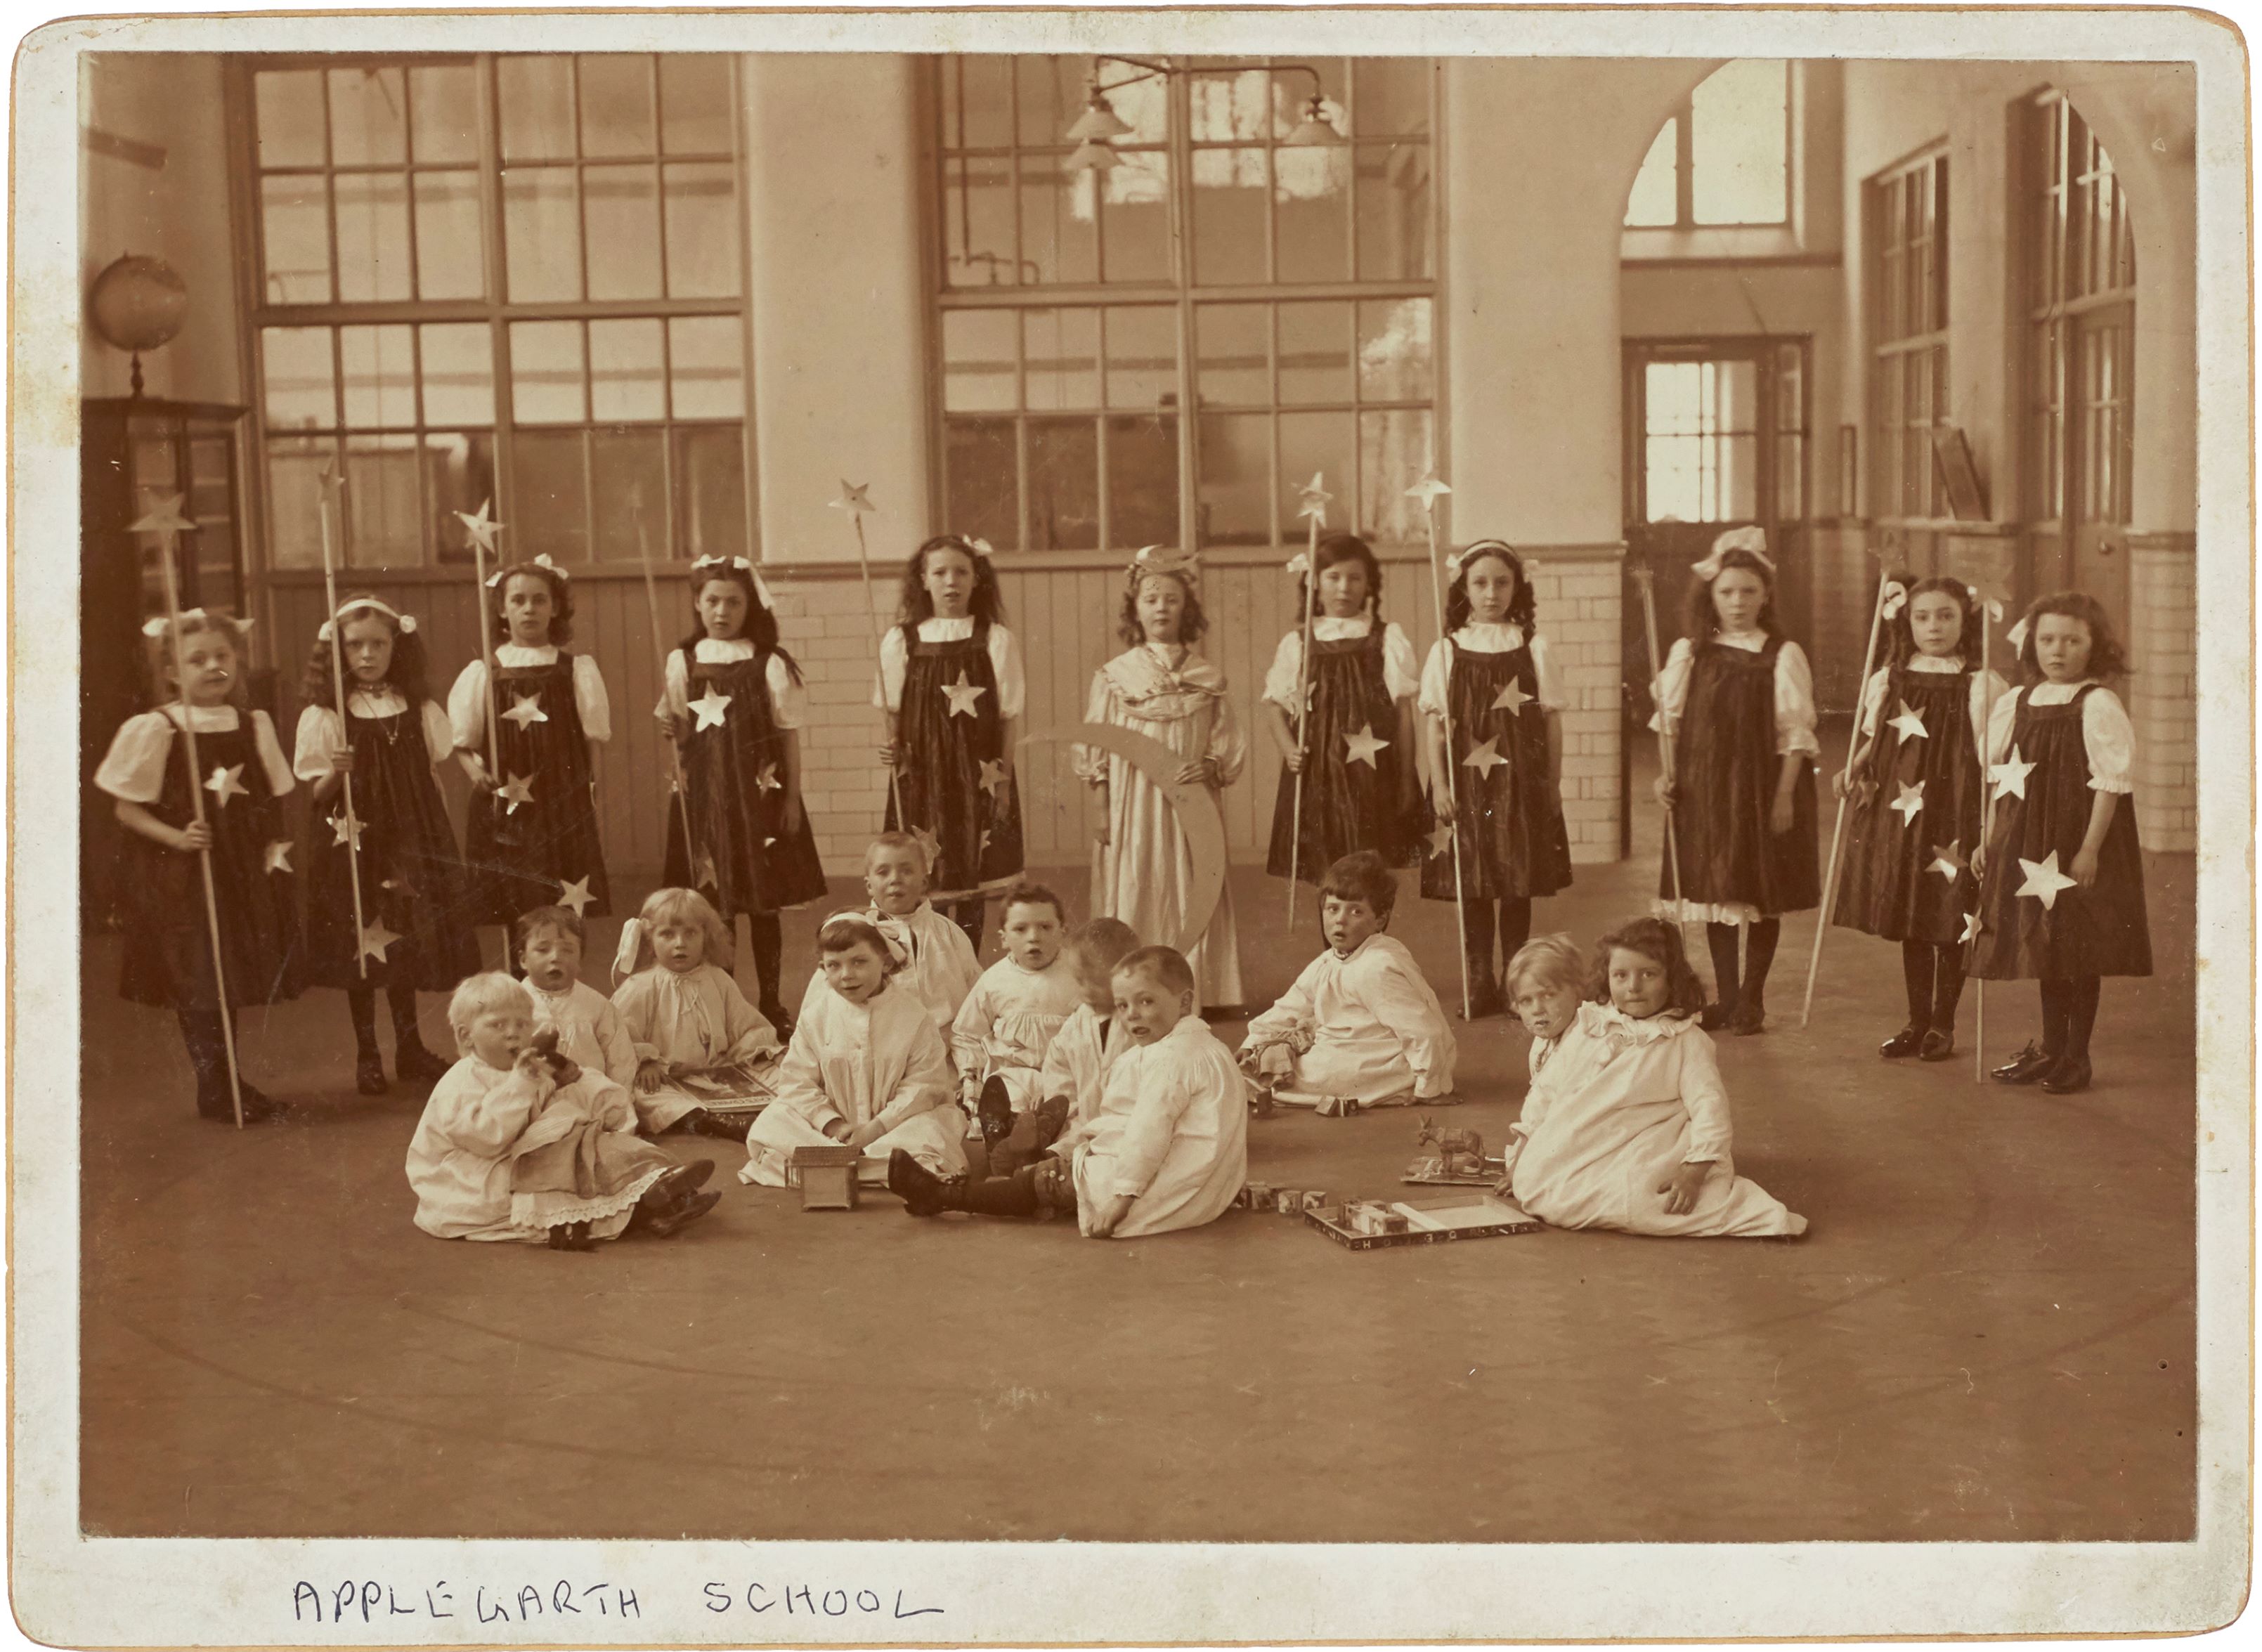 Pupils set for a performance at Applegarth School, Northallerton, in the early 20th century.